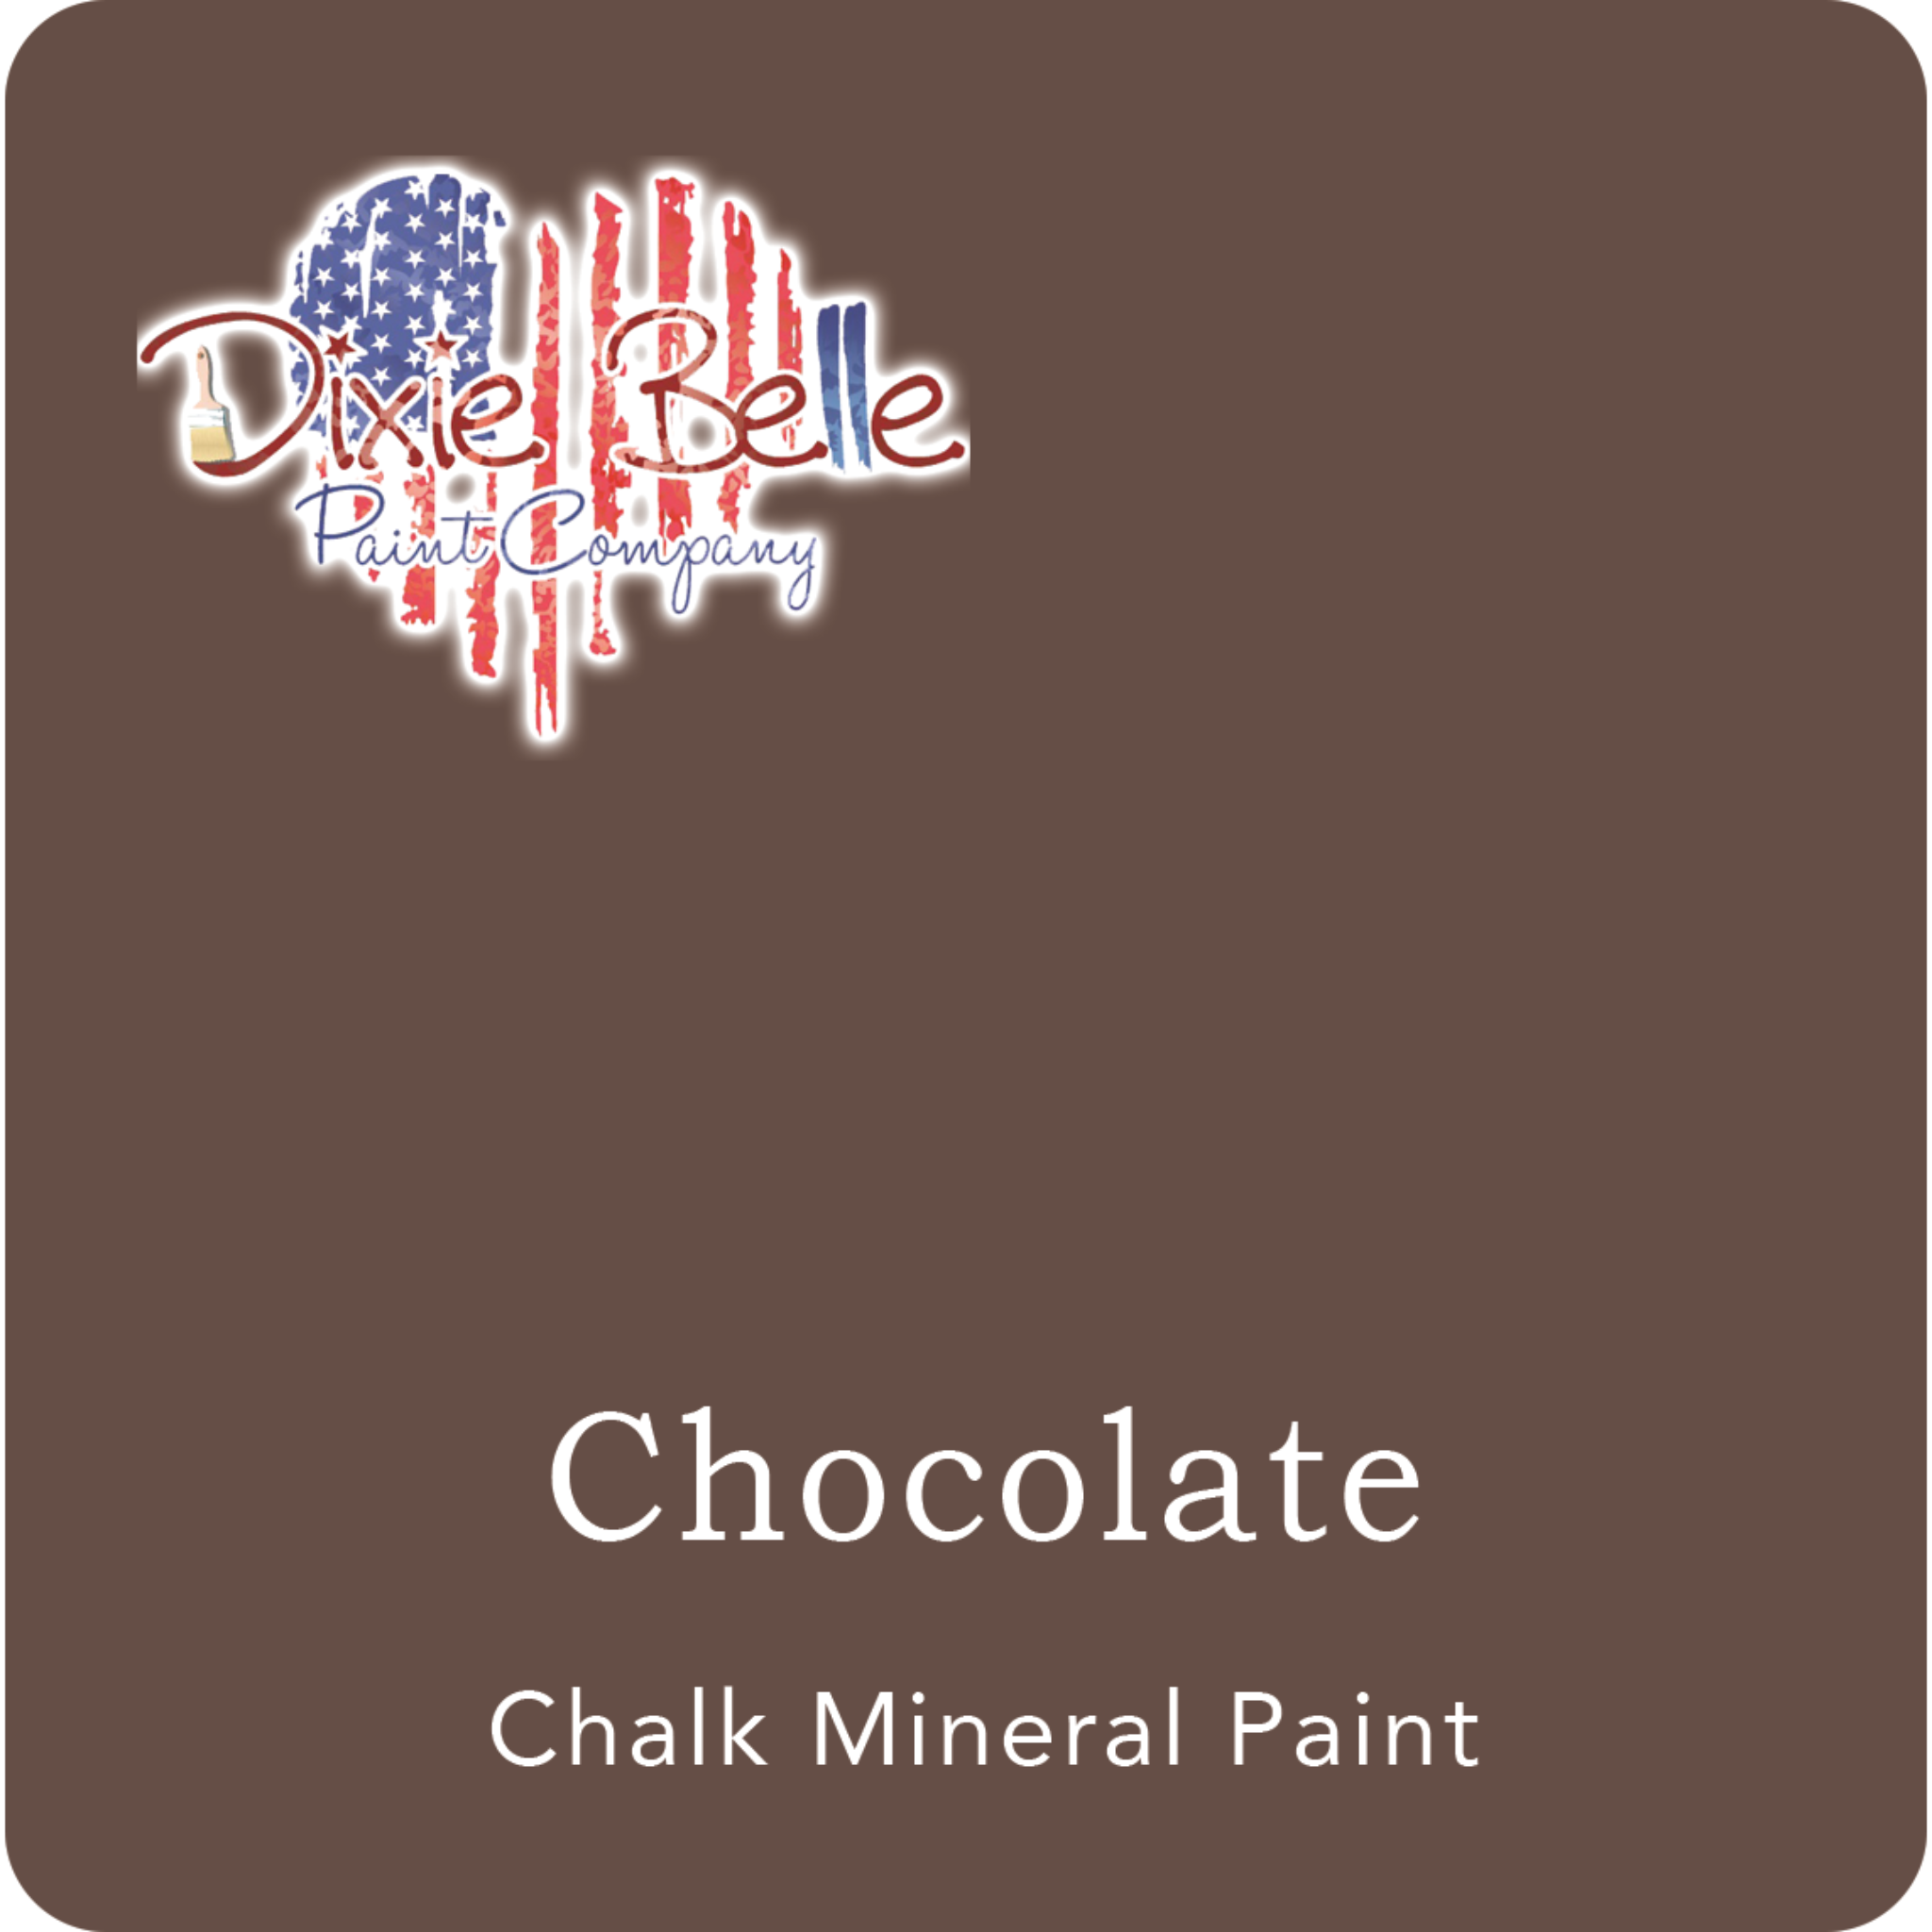 A square swatch card of Dixie Belle Paint Company’s Chocolate Chalk Mineral Paint. This color is a vibrant rich brown.